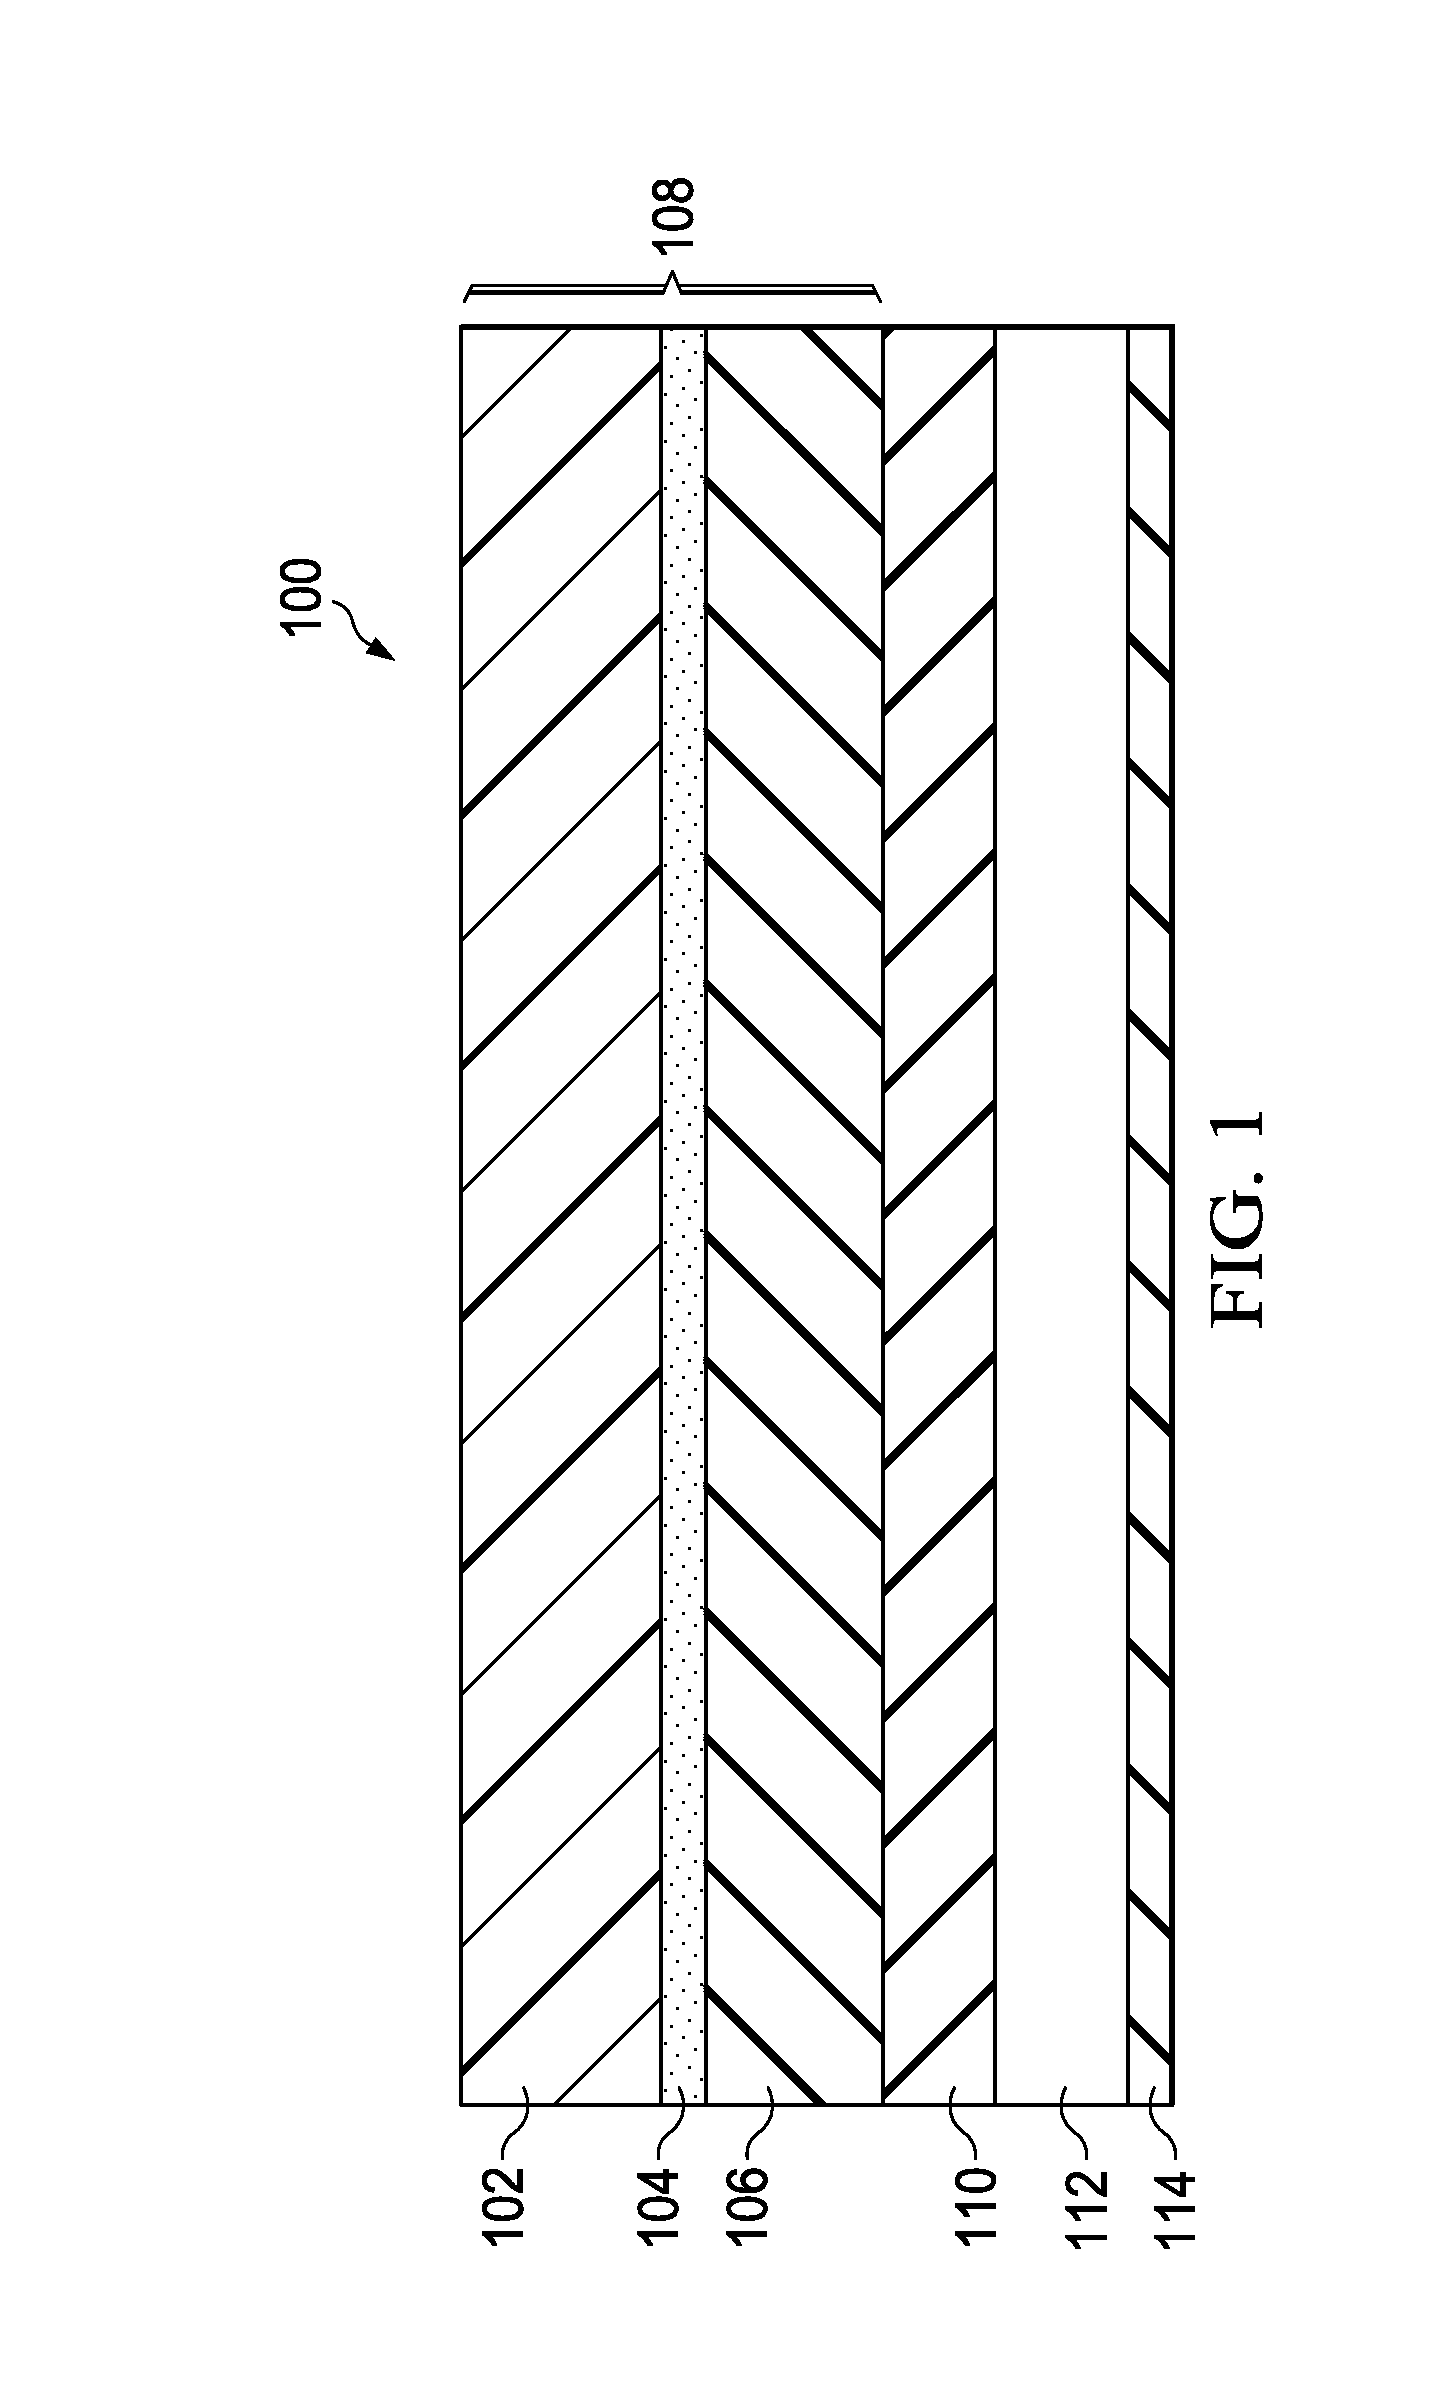 Lithography using Multilayer Spacer for Reduced Spacer Footing